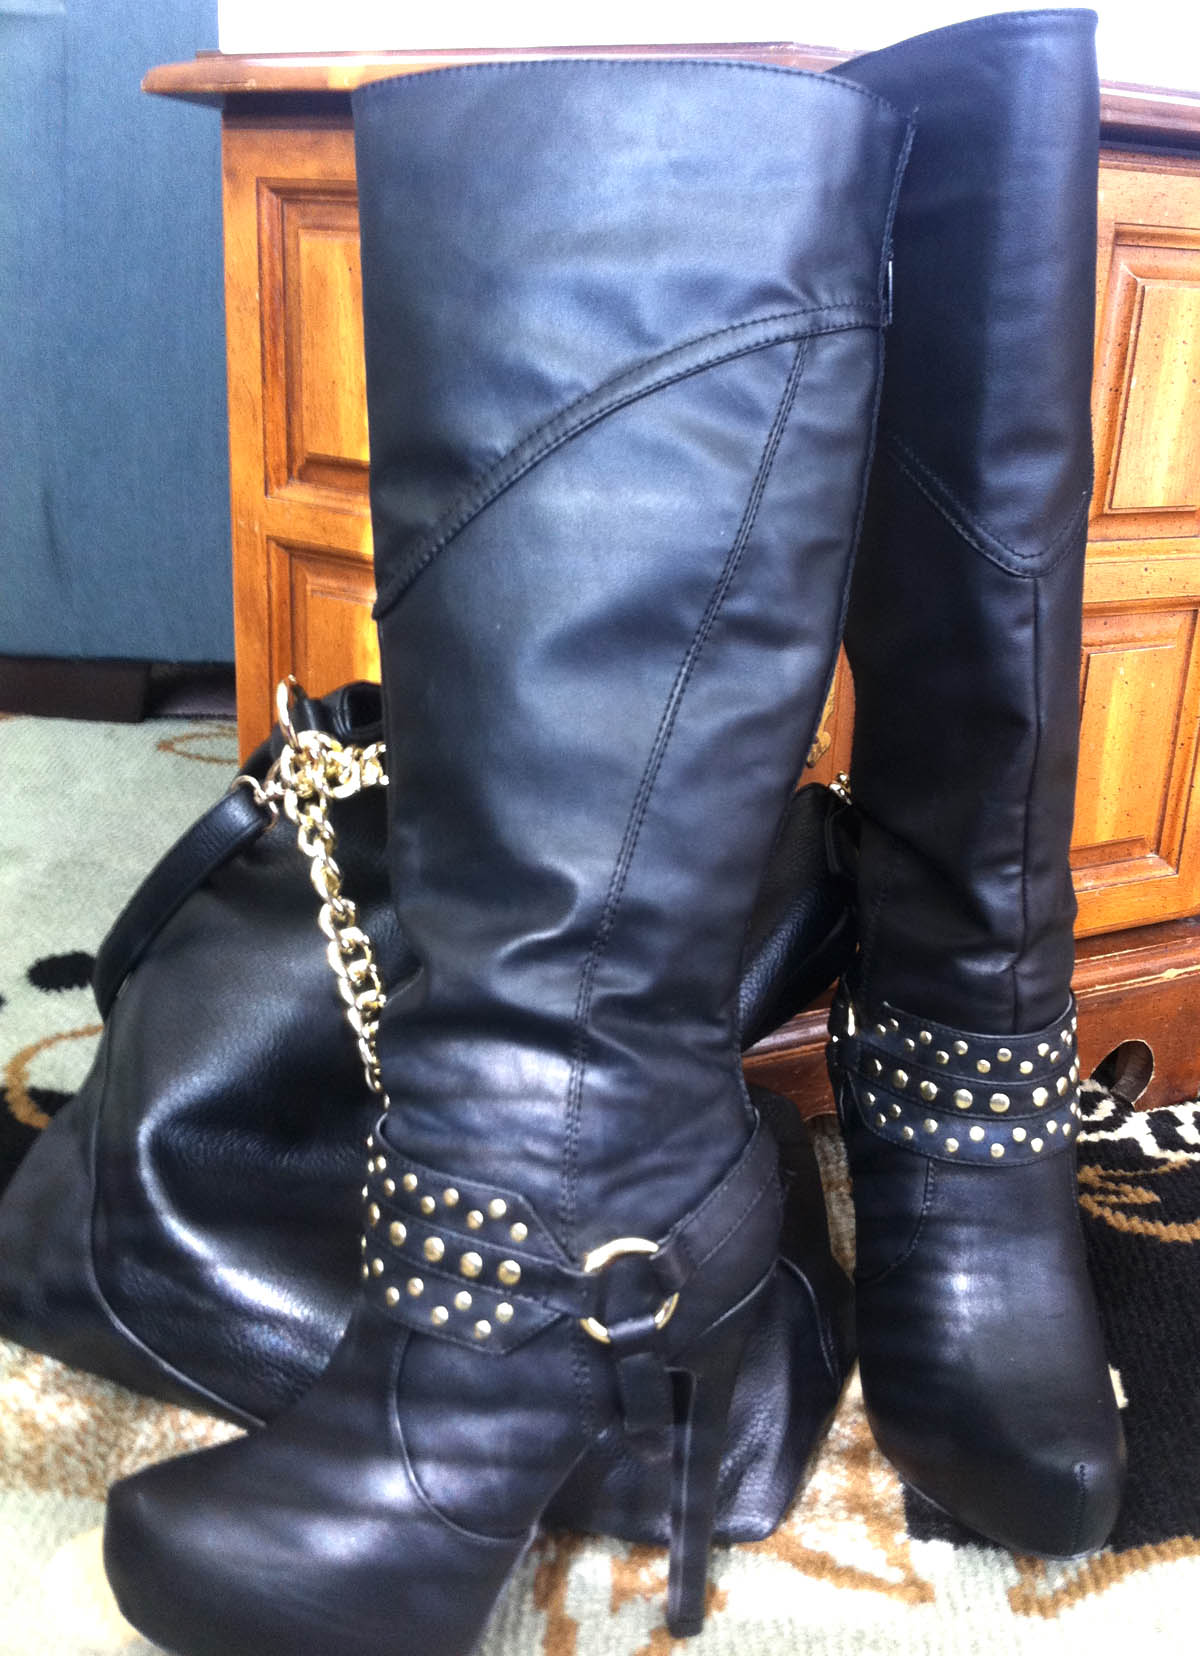 JustFab Diyana black faux leather knee high boots with gold details and Maxwell faux leather bag black